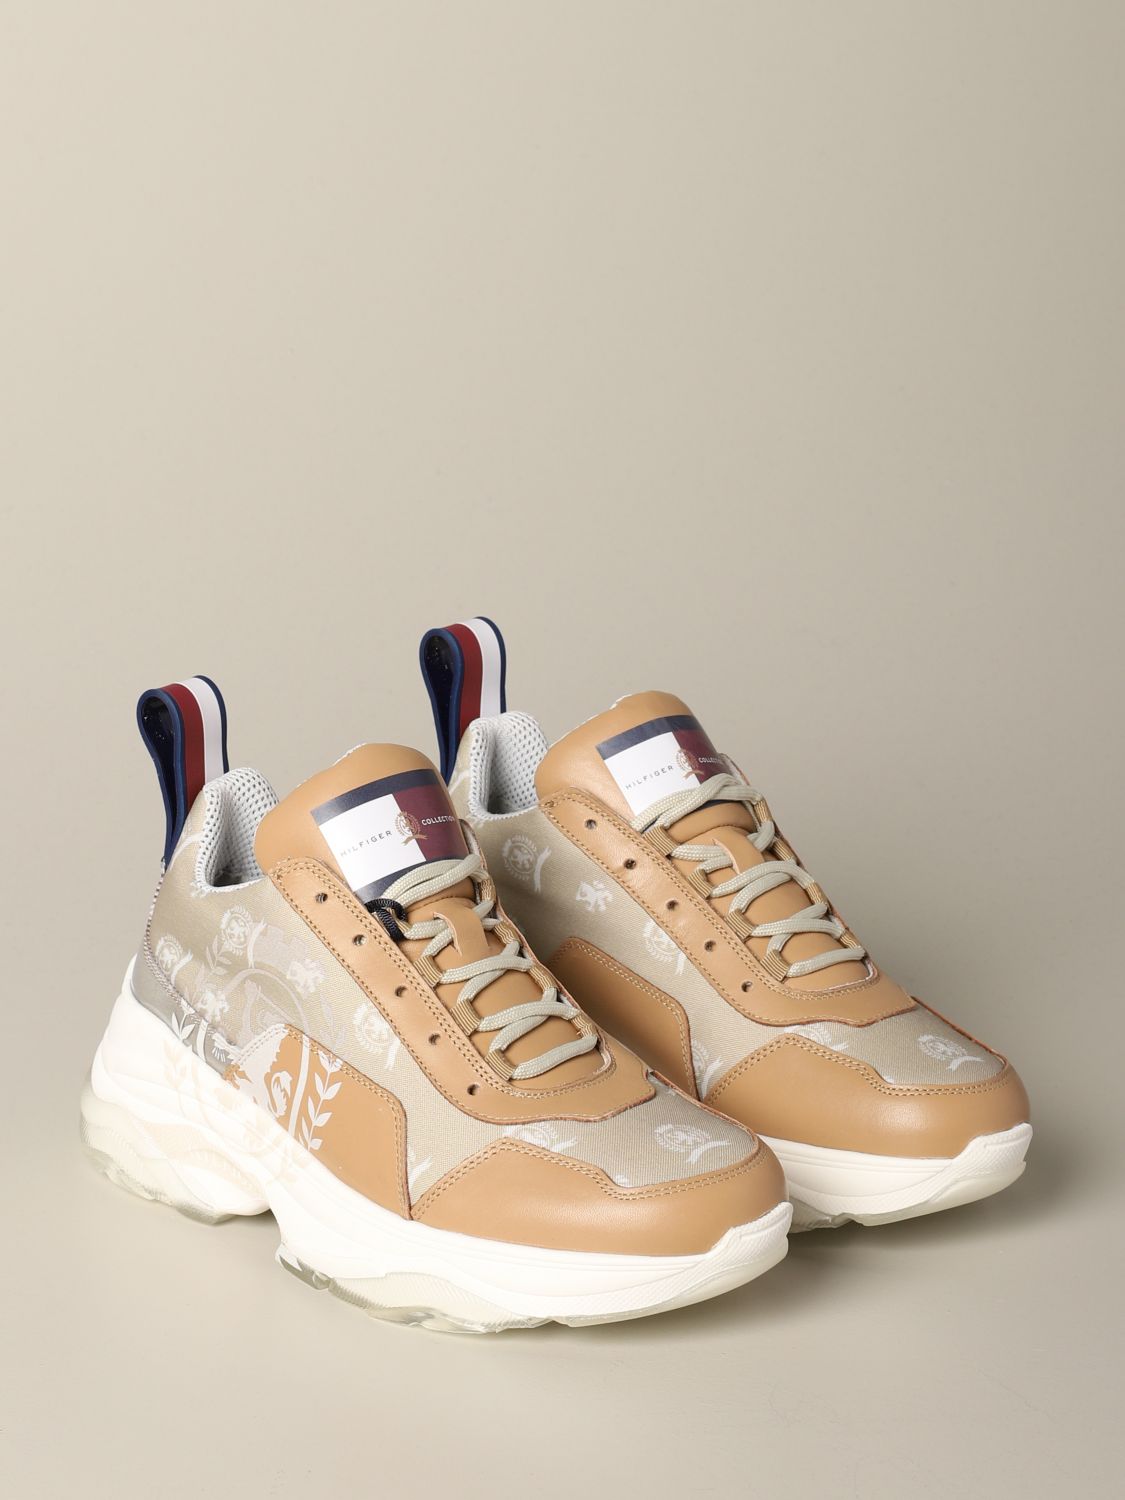 hilfiger collection shoes